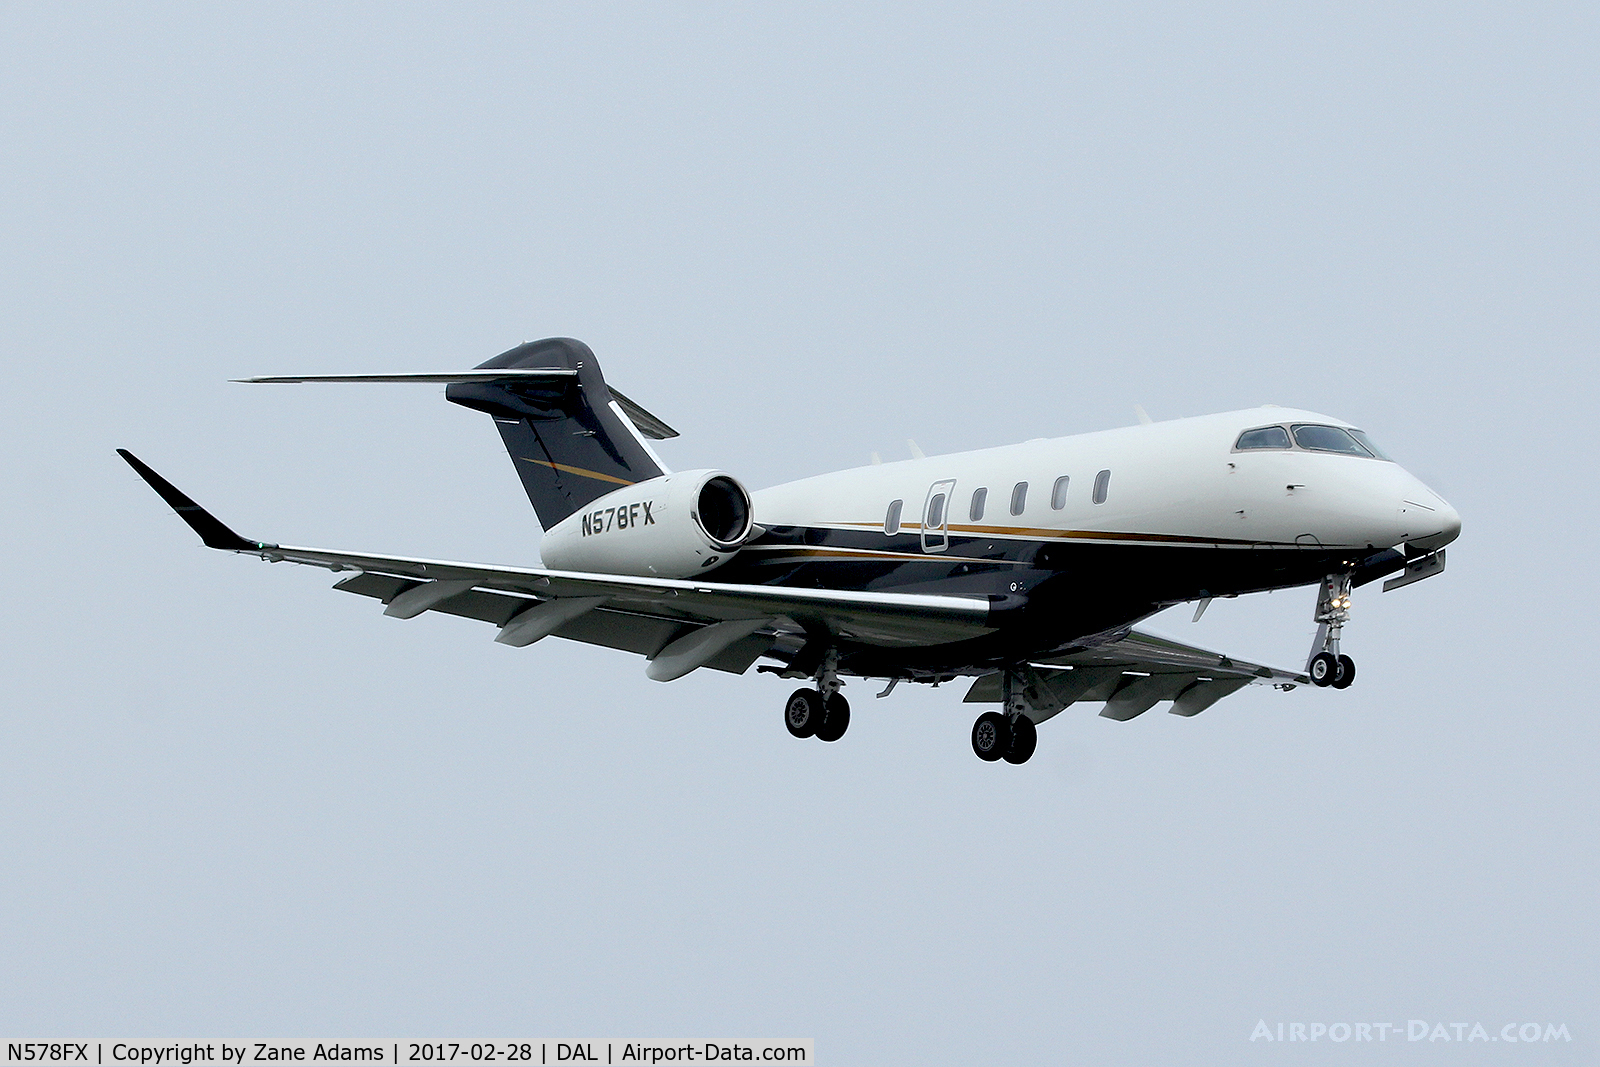 N578FX, 2015 Bombardier BD-100-1A10 Challenger 300 C/N 20601, Arriving at Dallas Love Field